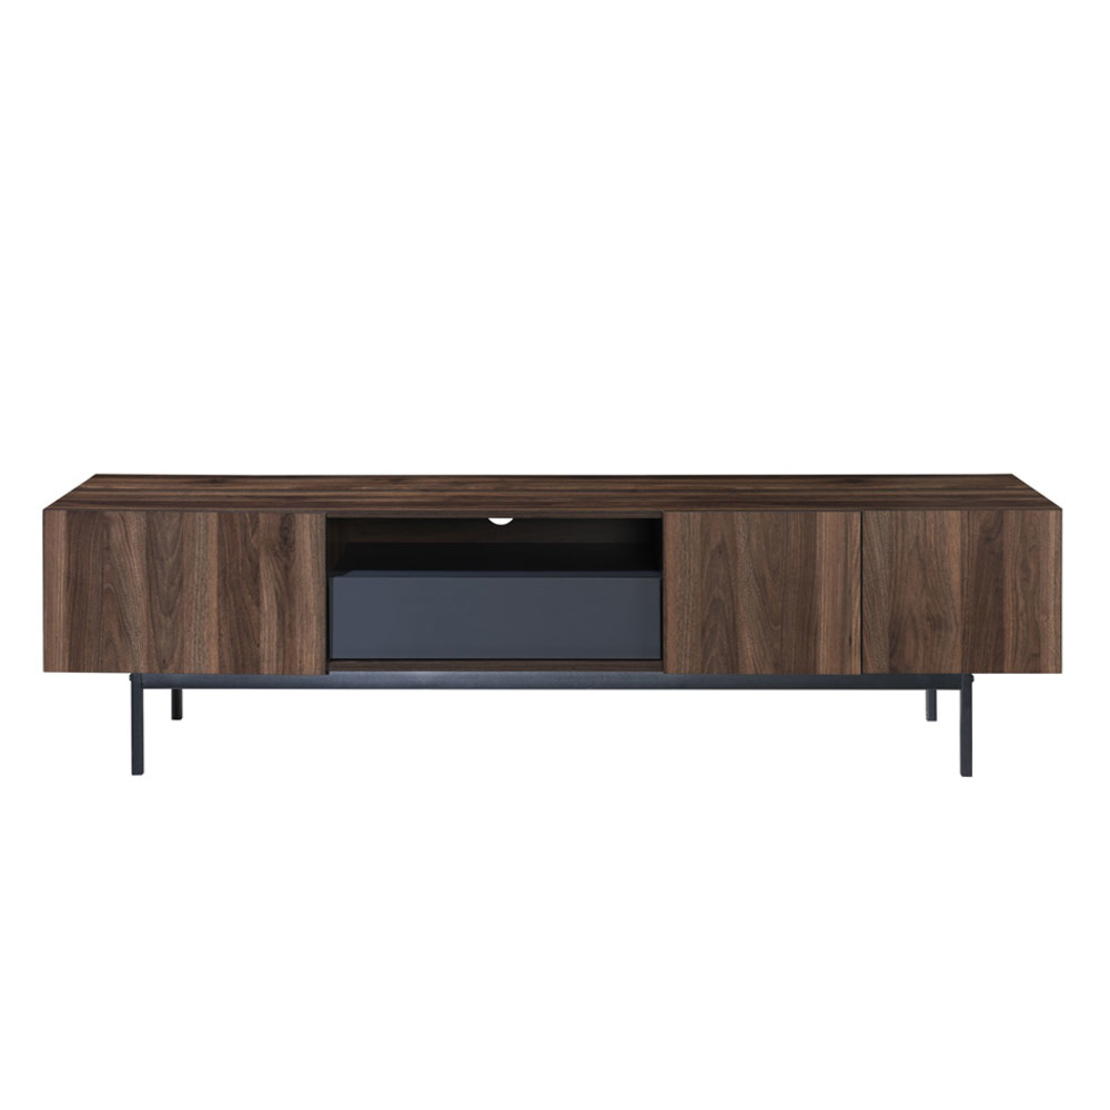 GROOVES TV STAND 2DOORS 2DRAWERS CHIPBOARD WITH MELAMINE CARTA WOTAN OAK GREY METAL 180x41,5xH50cm MY